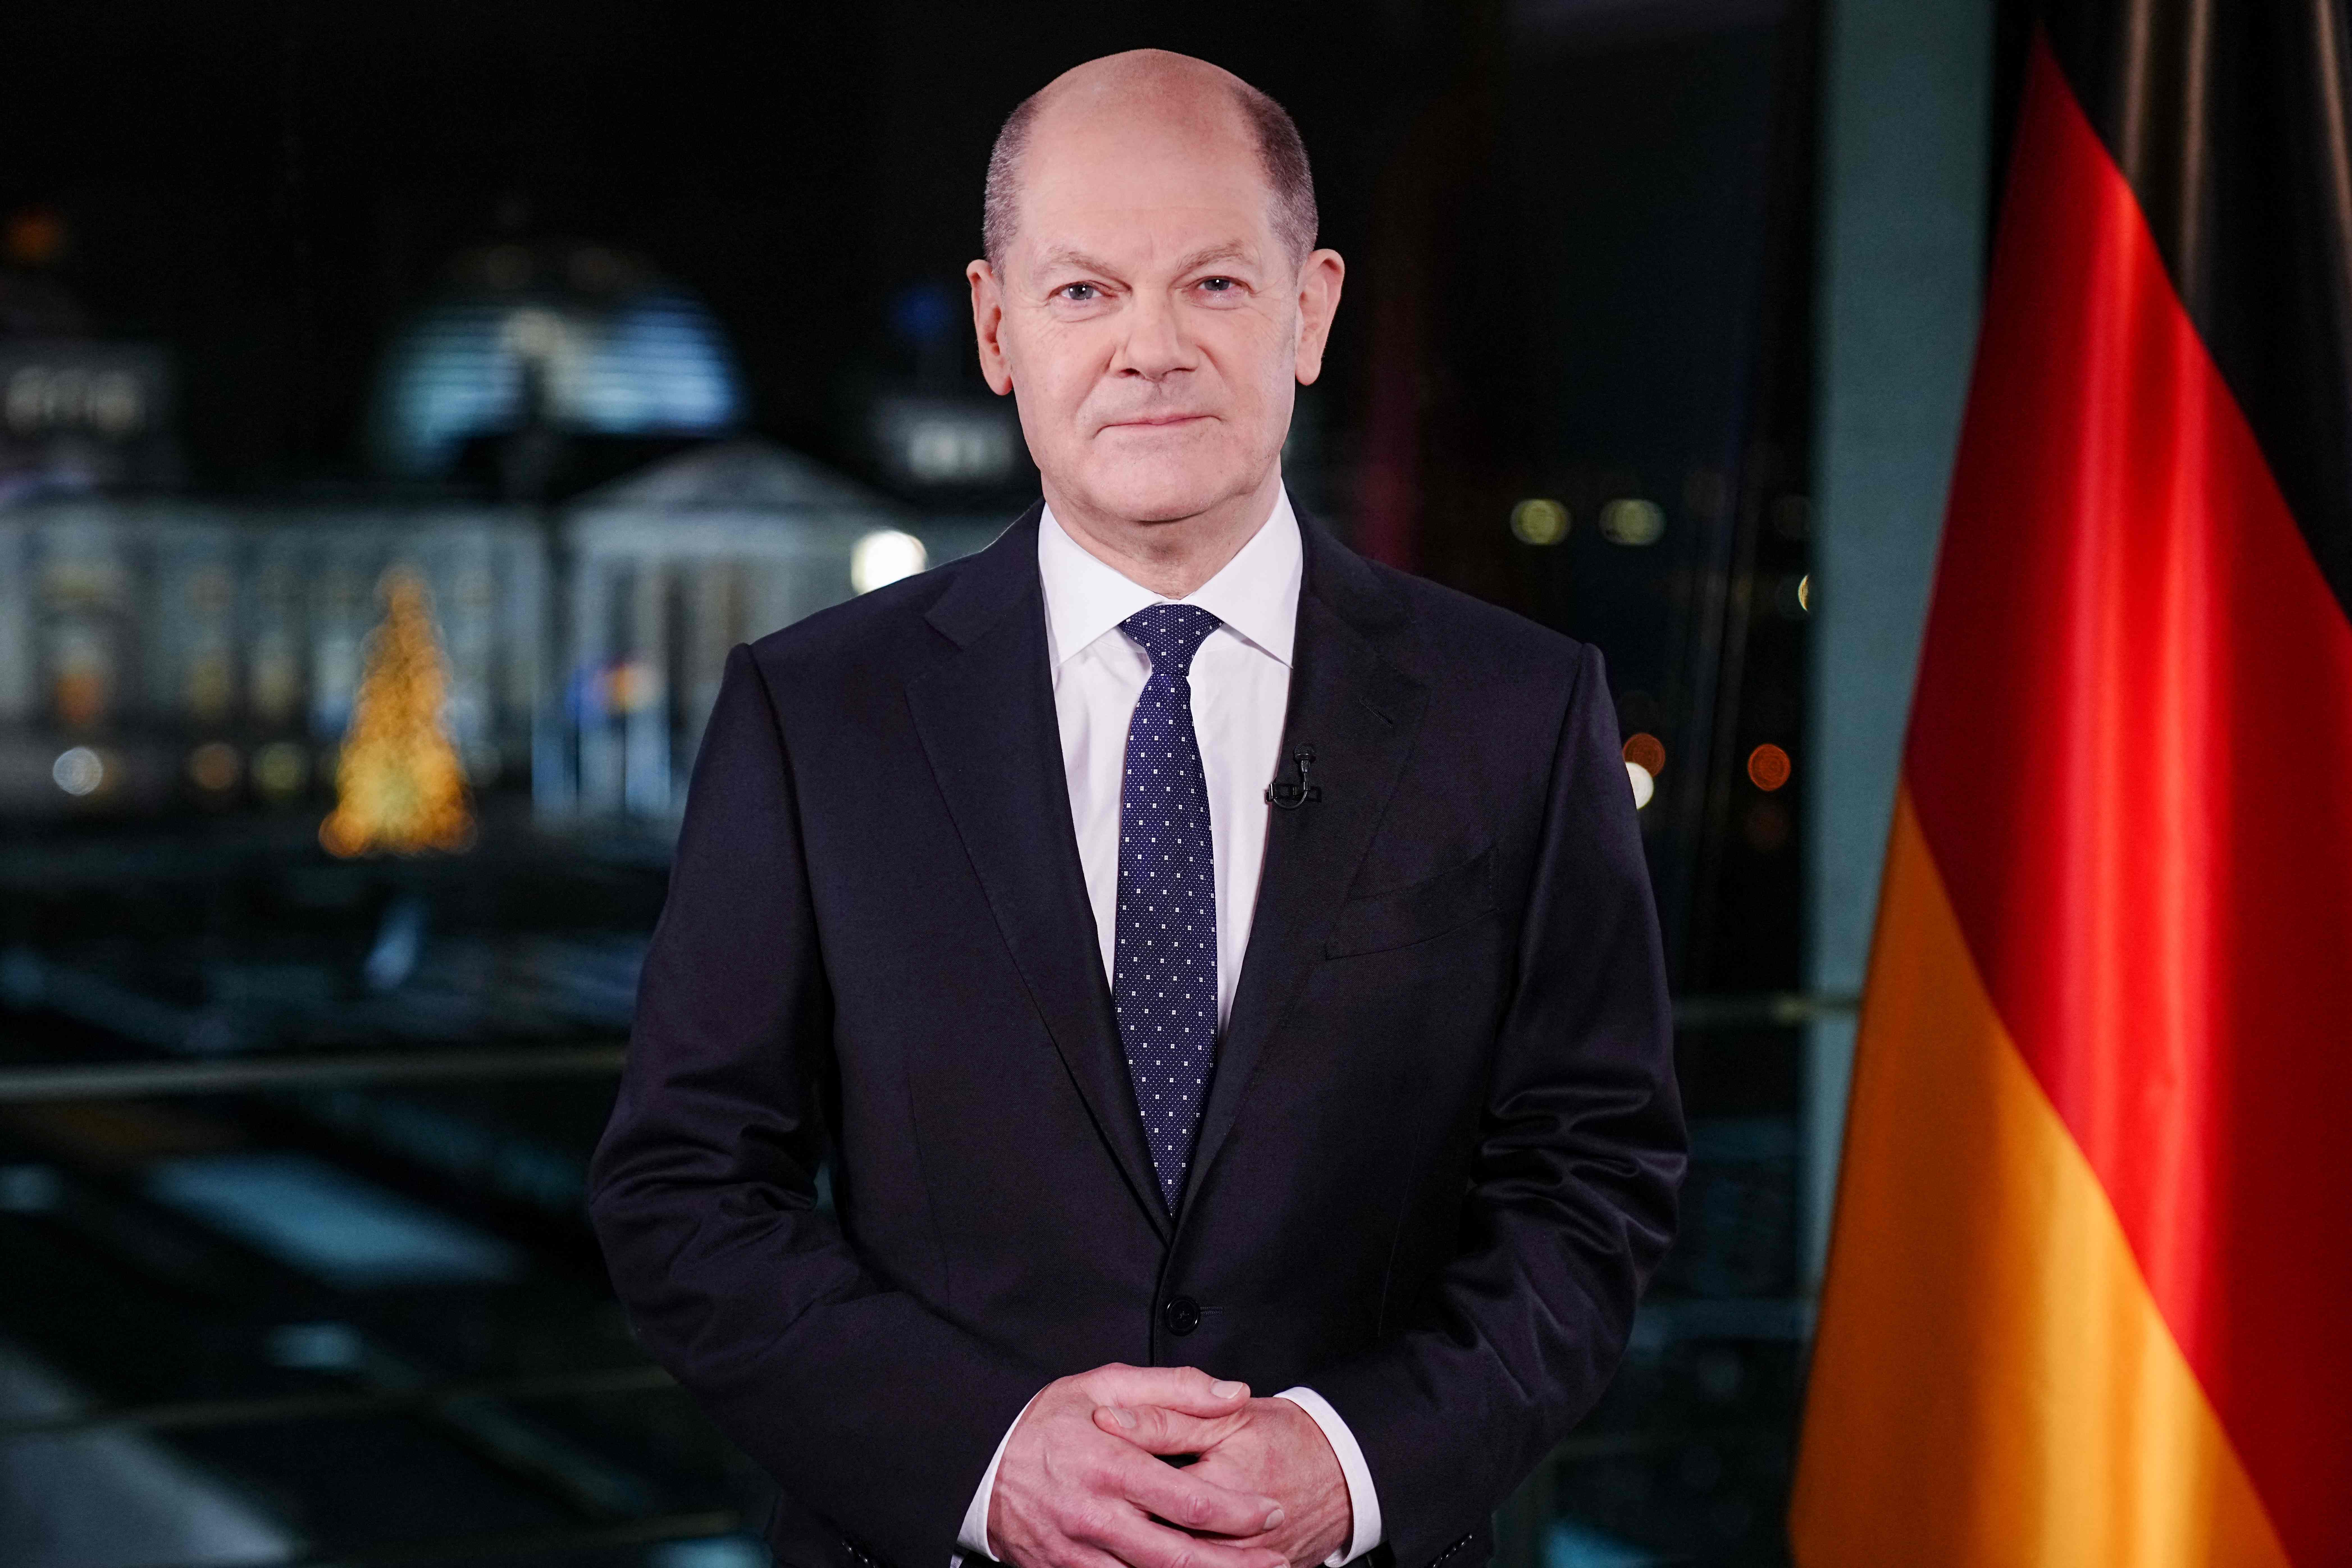 German Chancellor Olaf Scholz poses for photographs in occasion of the recording of his New Year's speech at the chancellery in Berlin